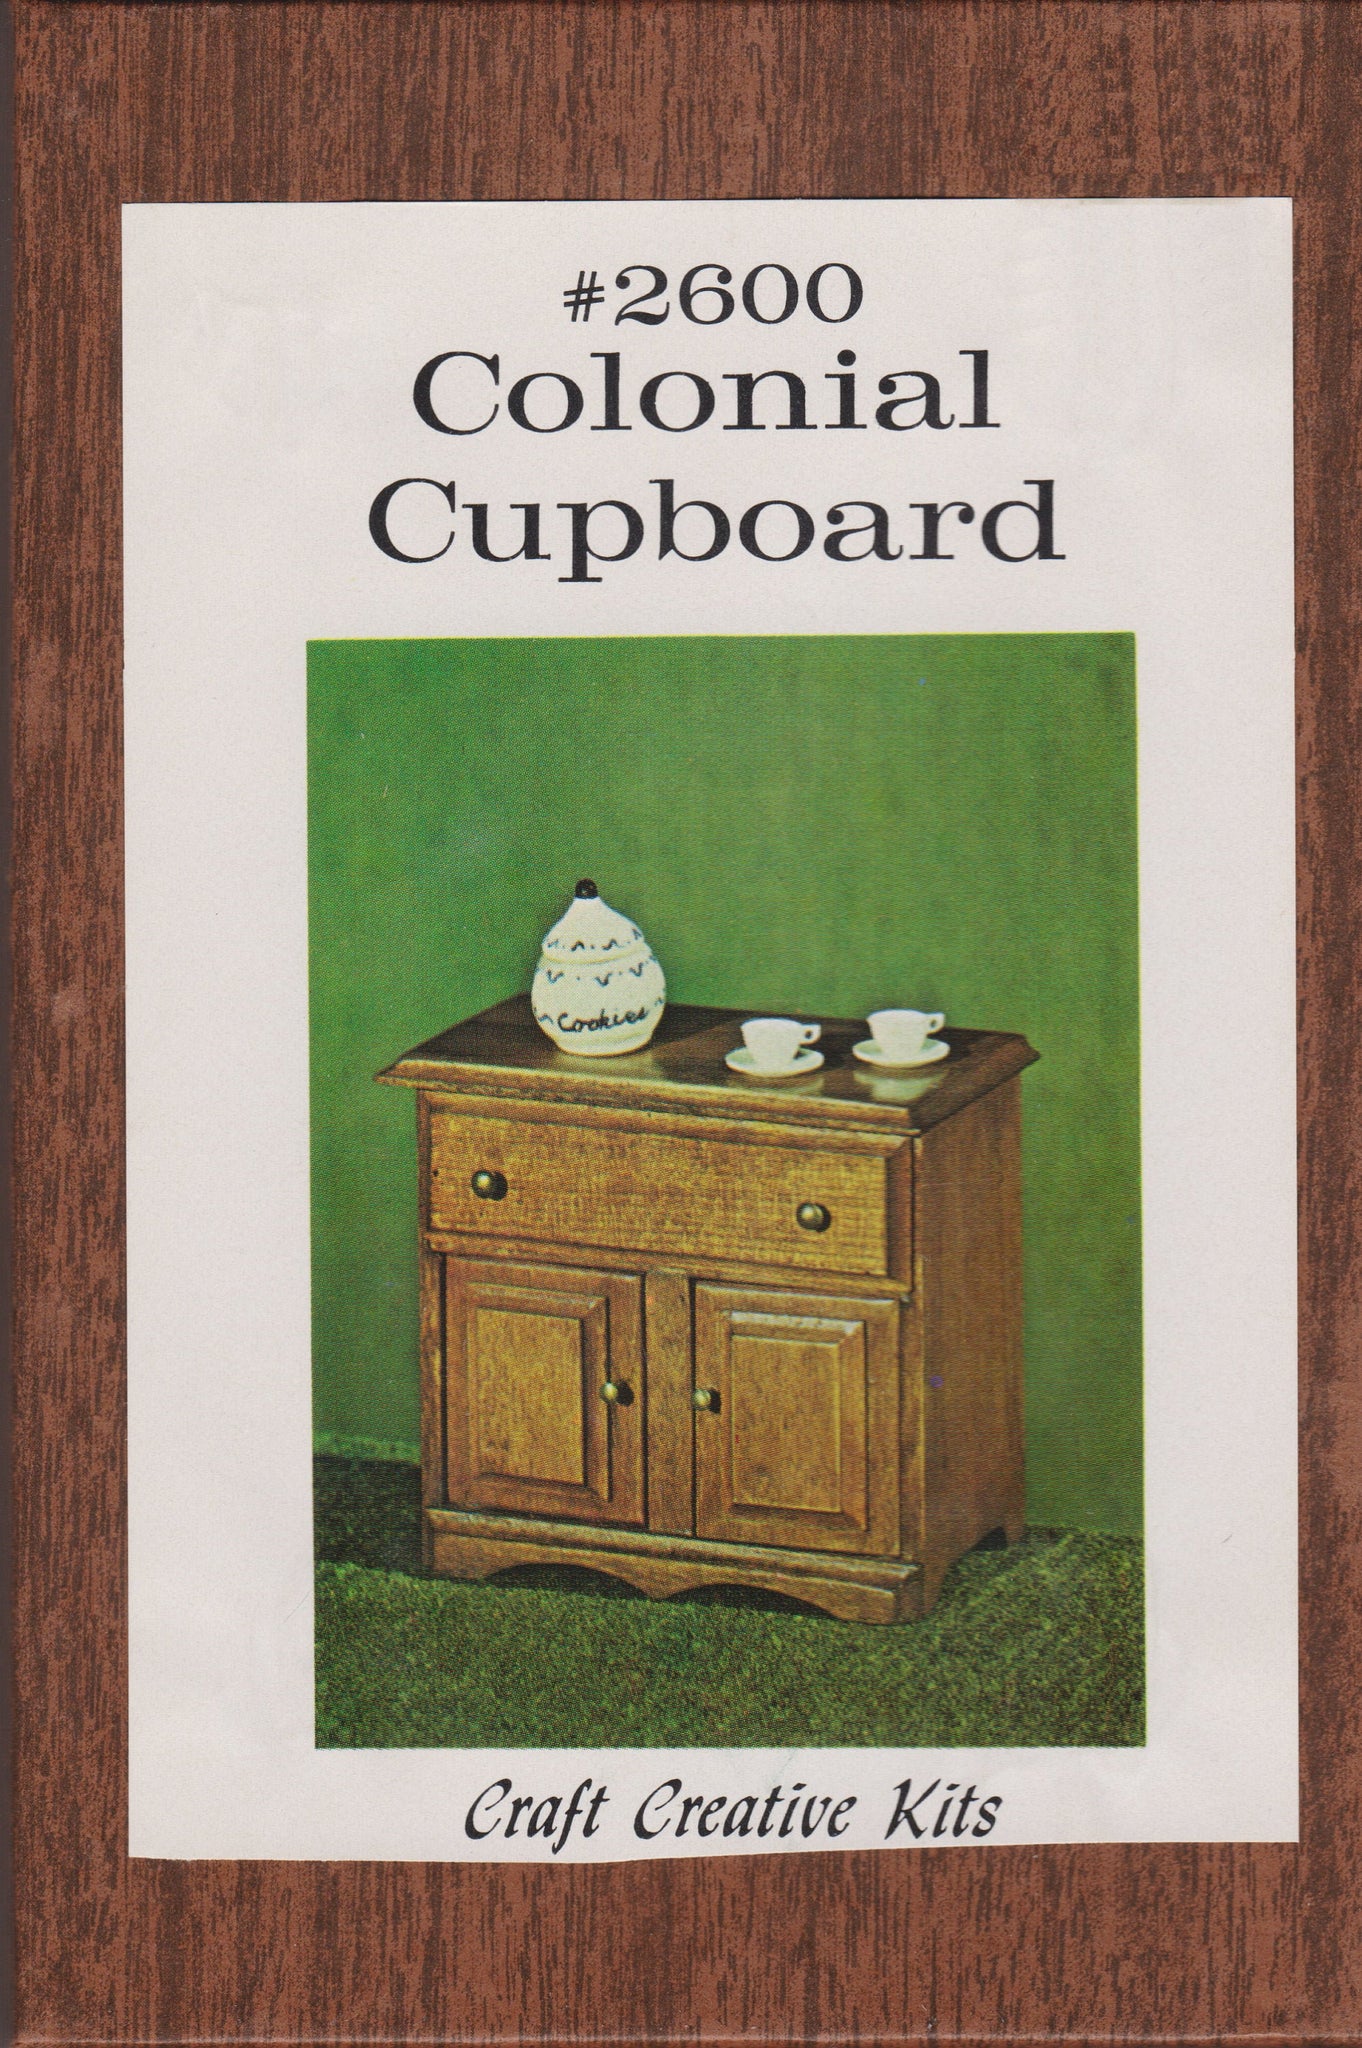 Craft Creative Kits #2600 Colonial Cupboard by Craft Products Company c.1974